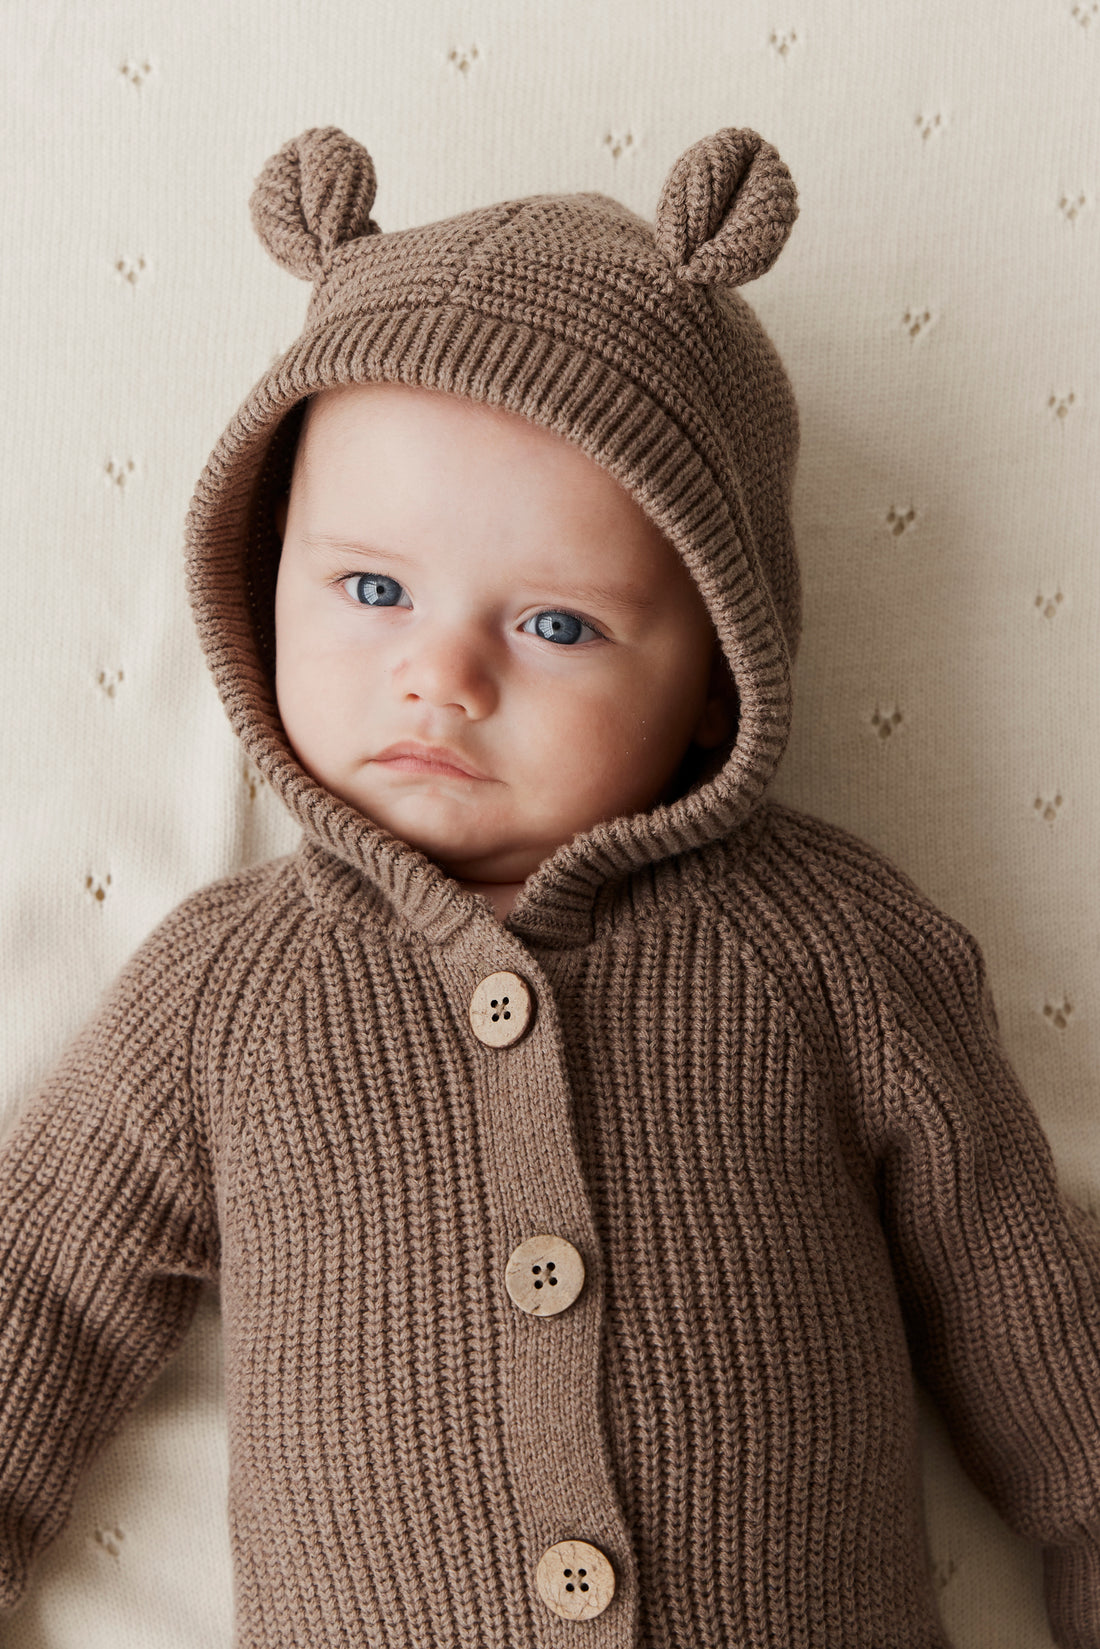 Luca Onepiece - Mouse Marle Childrens Onepiece from Jamie Kay NZ